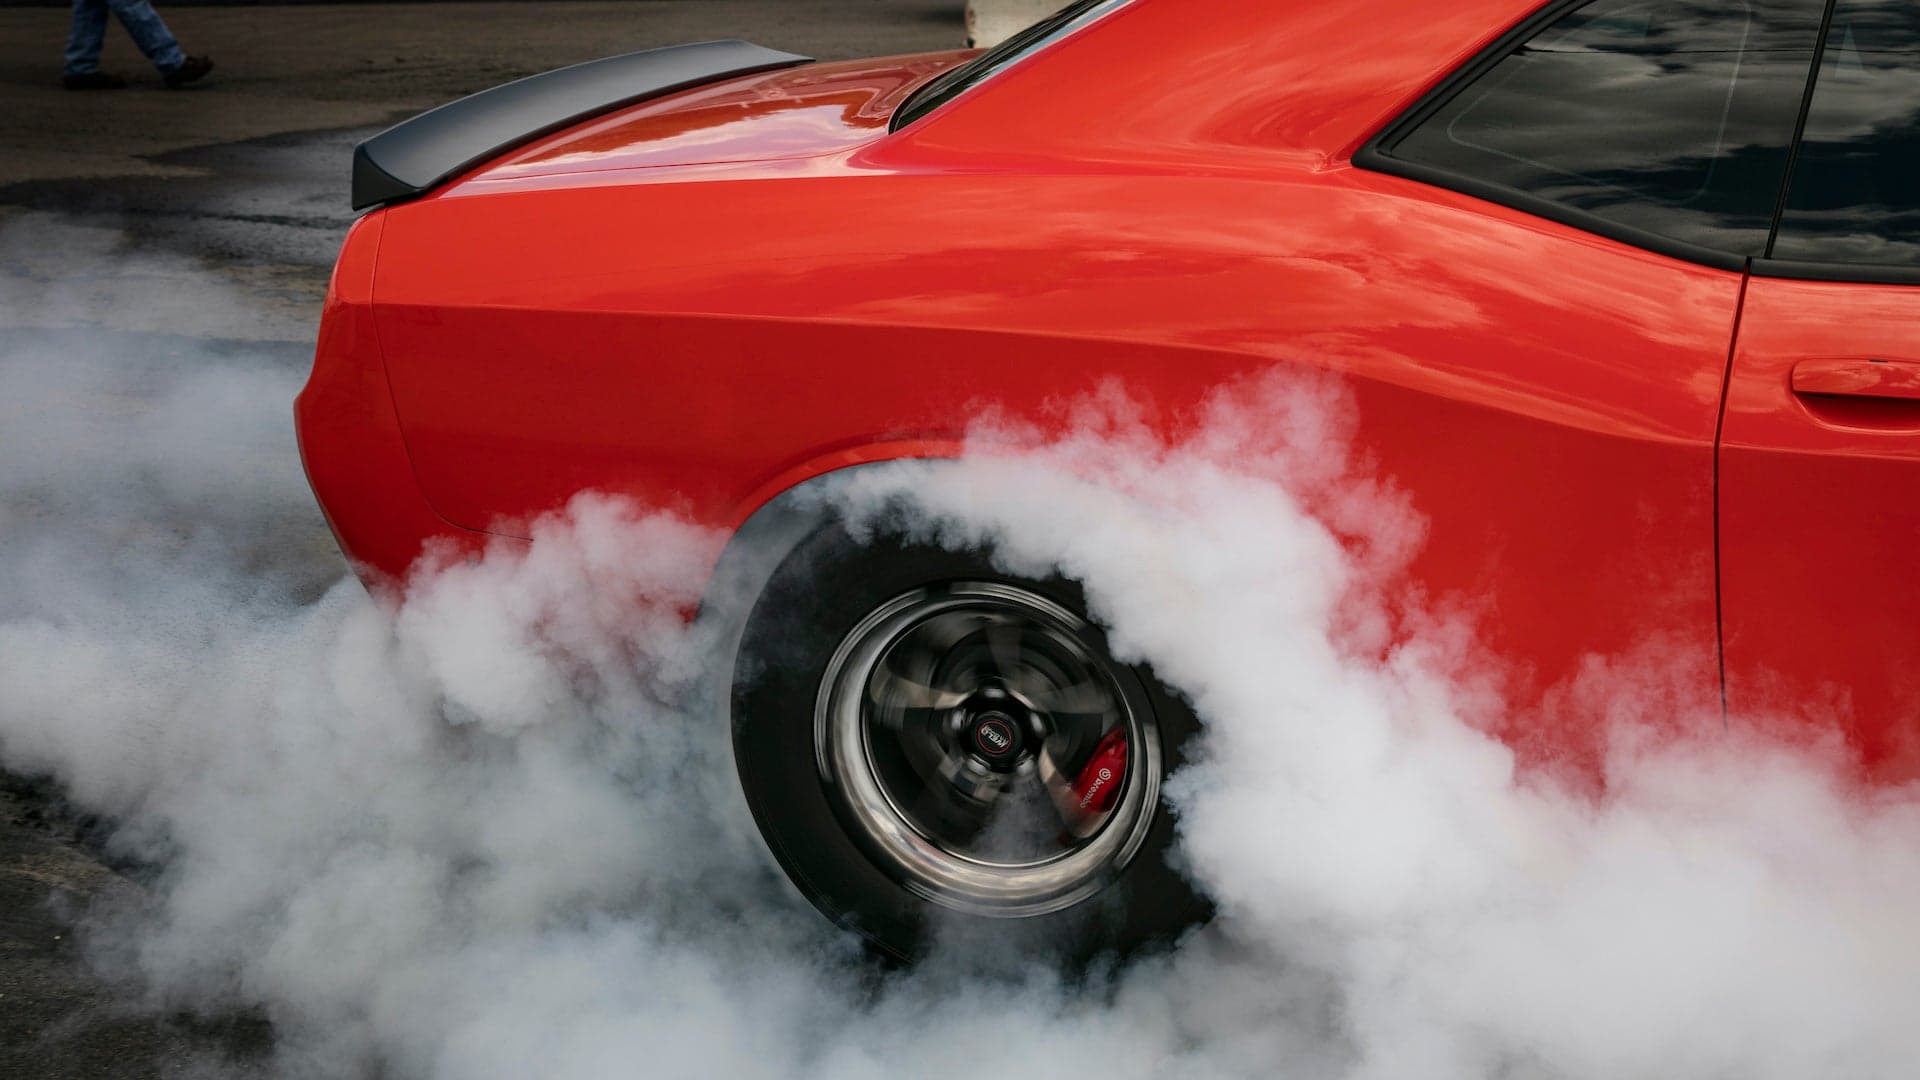 Tires Cause 1,000 Times More Pollution Than Exhaust Fumes, Study Claims